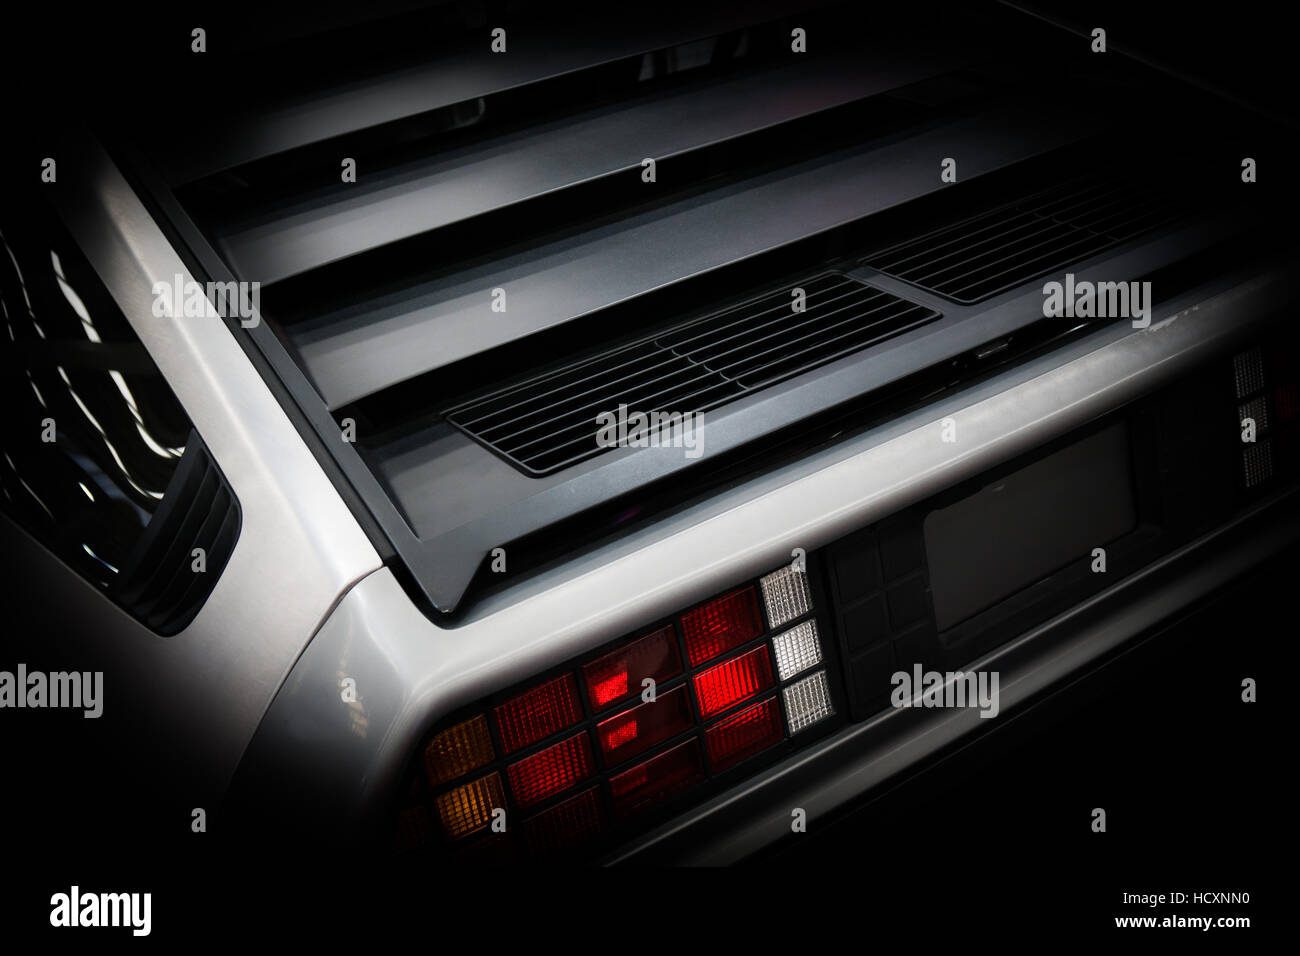 Rear Left High Resolution Stock Photography And Images Alamy